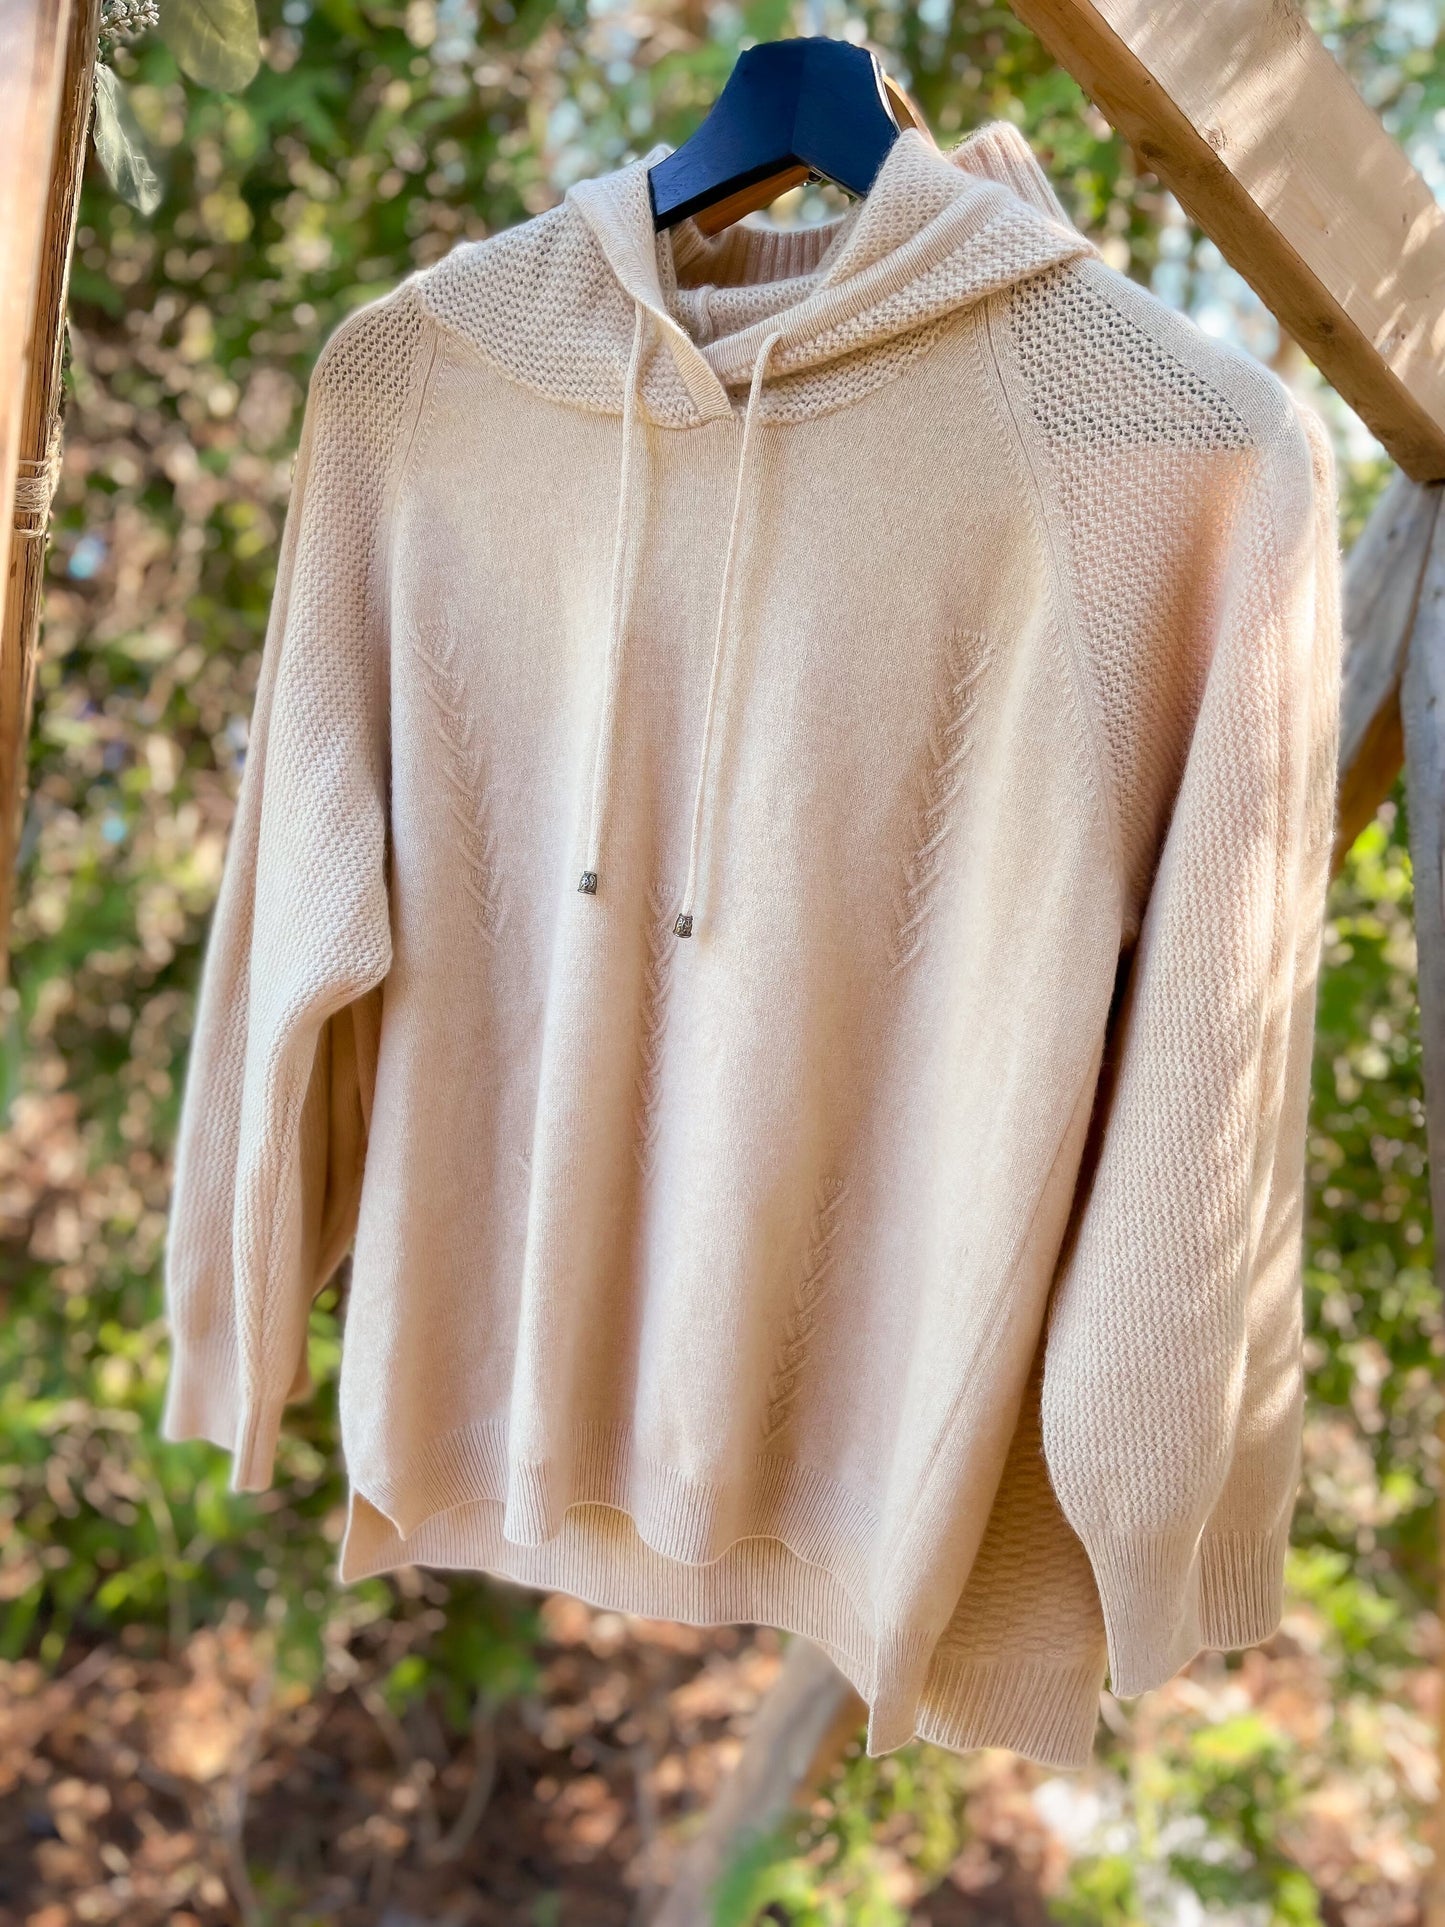 Cashmere Hoodie Sweater